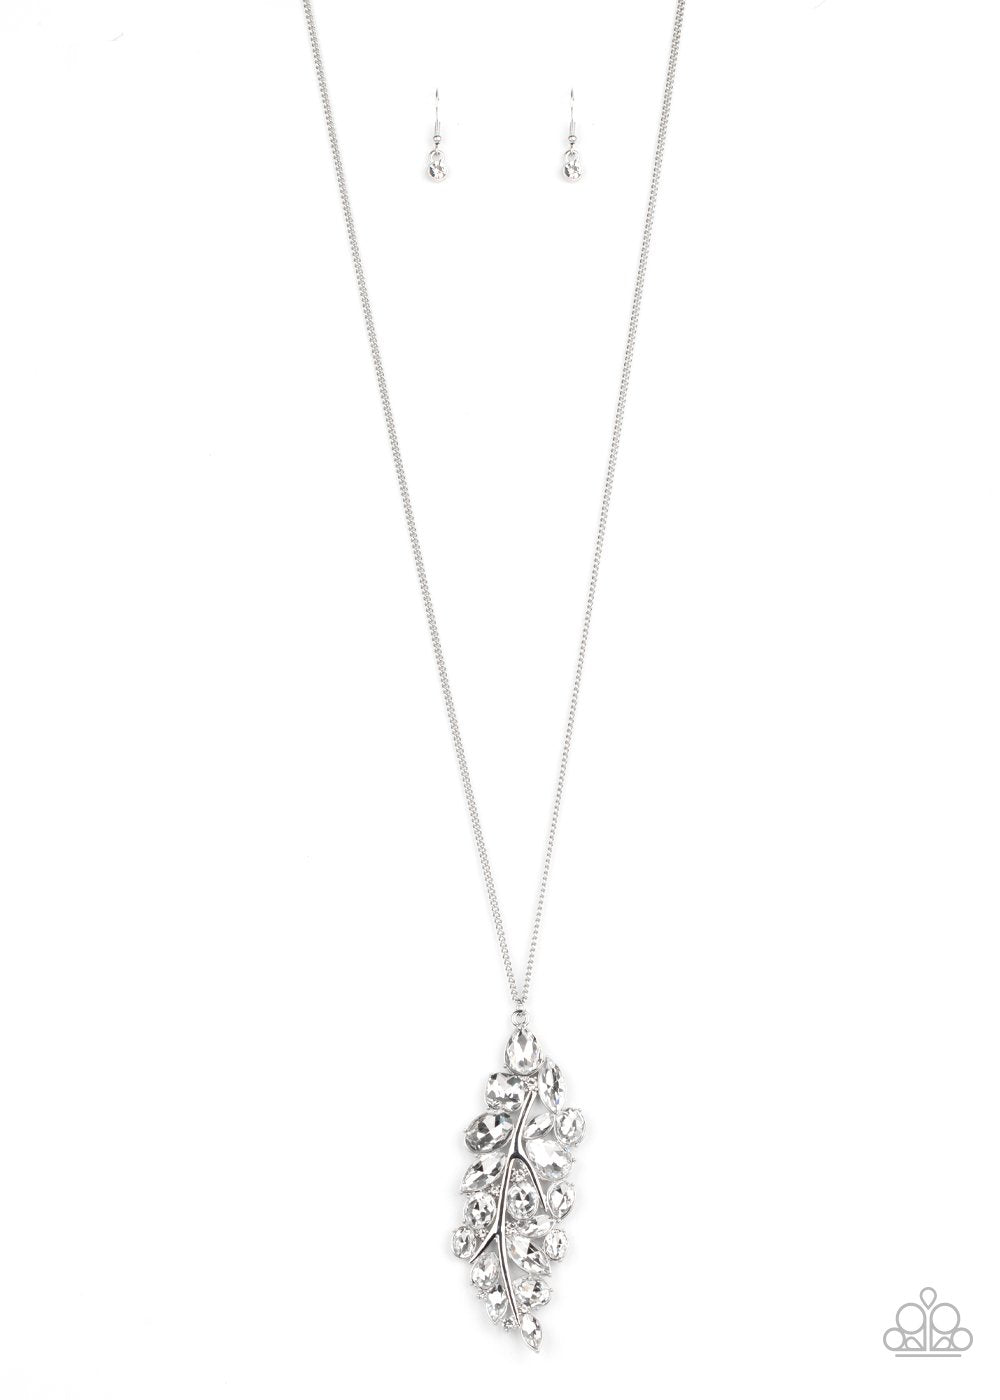 Take A Final BOUGH White Rhinestone Leaf Necklace - Paparazzi Accessories Life of the Party Exclusive December 2020-CarasShop.com - $5 Jewelry by Cara Jewels